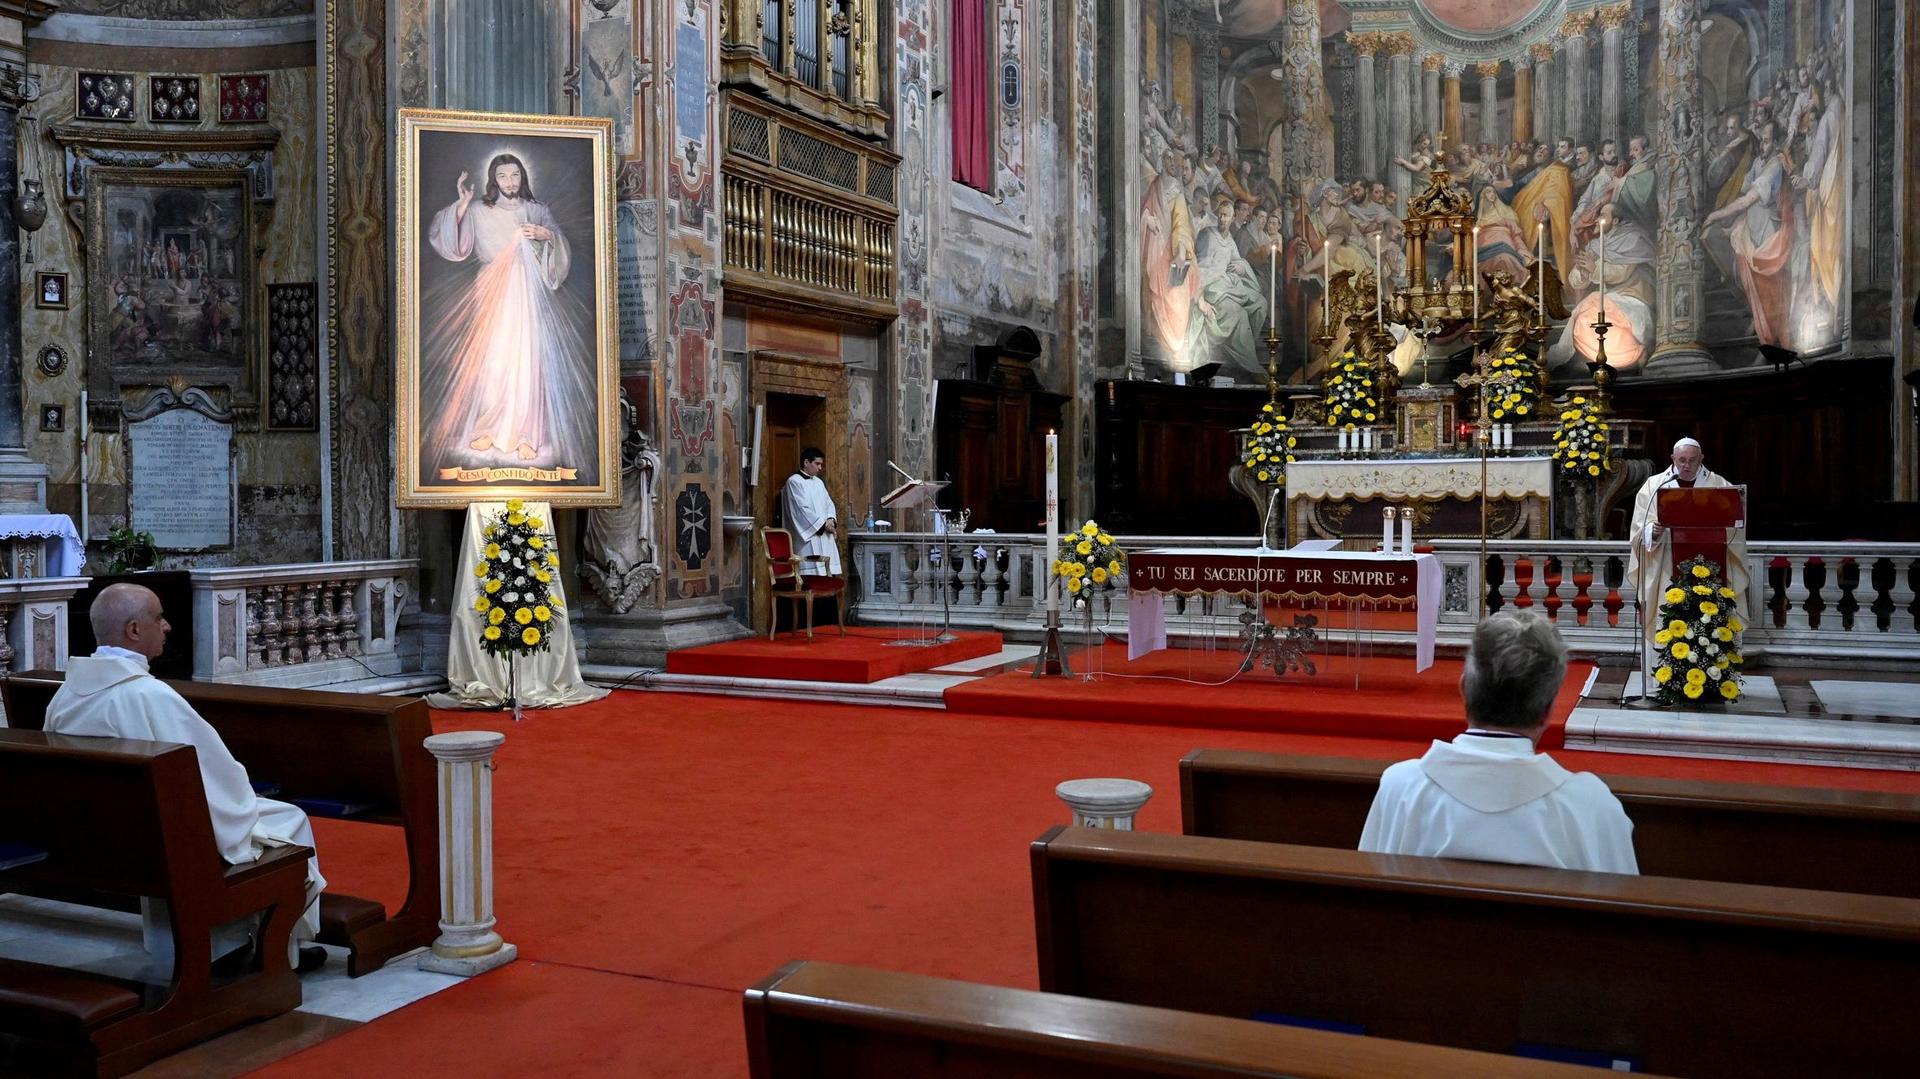 Pope Francis leads Mass and the Regina Coeli prayer in Rome's Santo Spirito in Sassia church without public participation due to an outbreak of the coronavirus disease (COVID-19), in Rome, April 19, 2020.